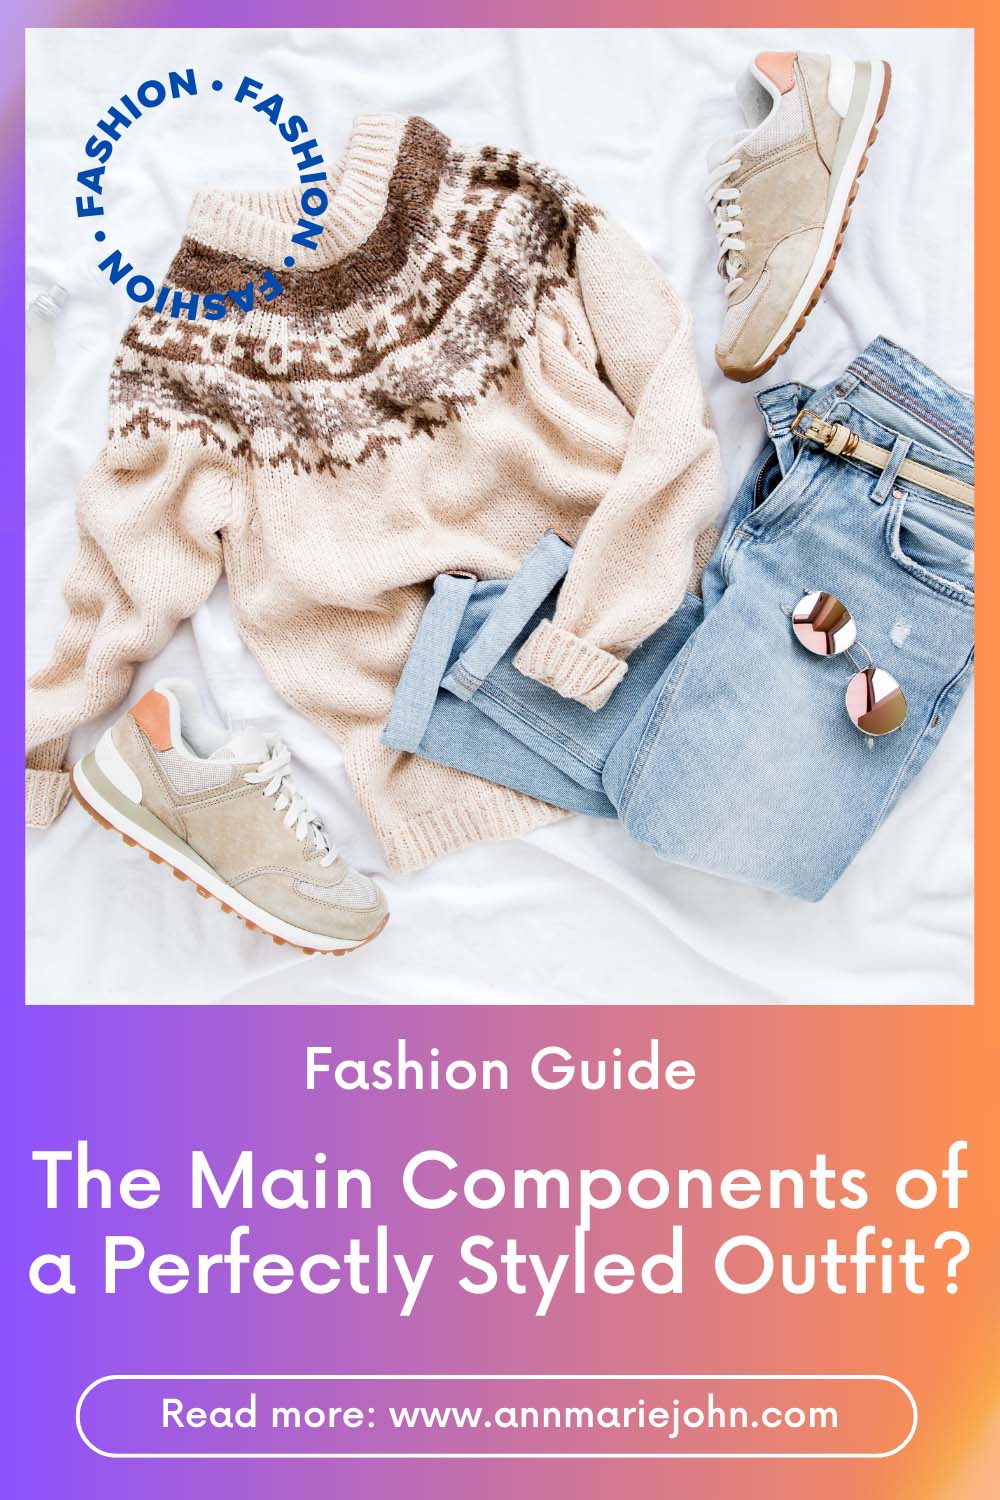 The Main Components of a Perfectly Styled Outfit?